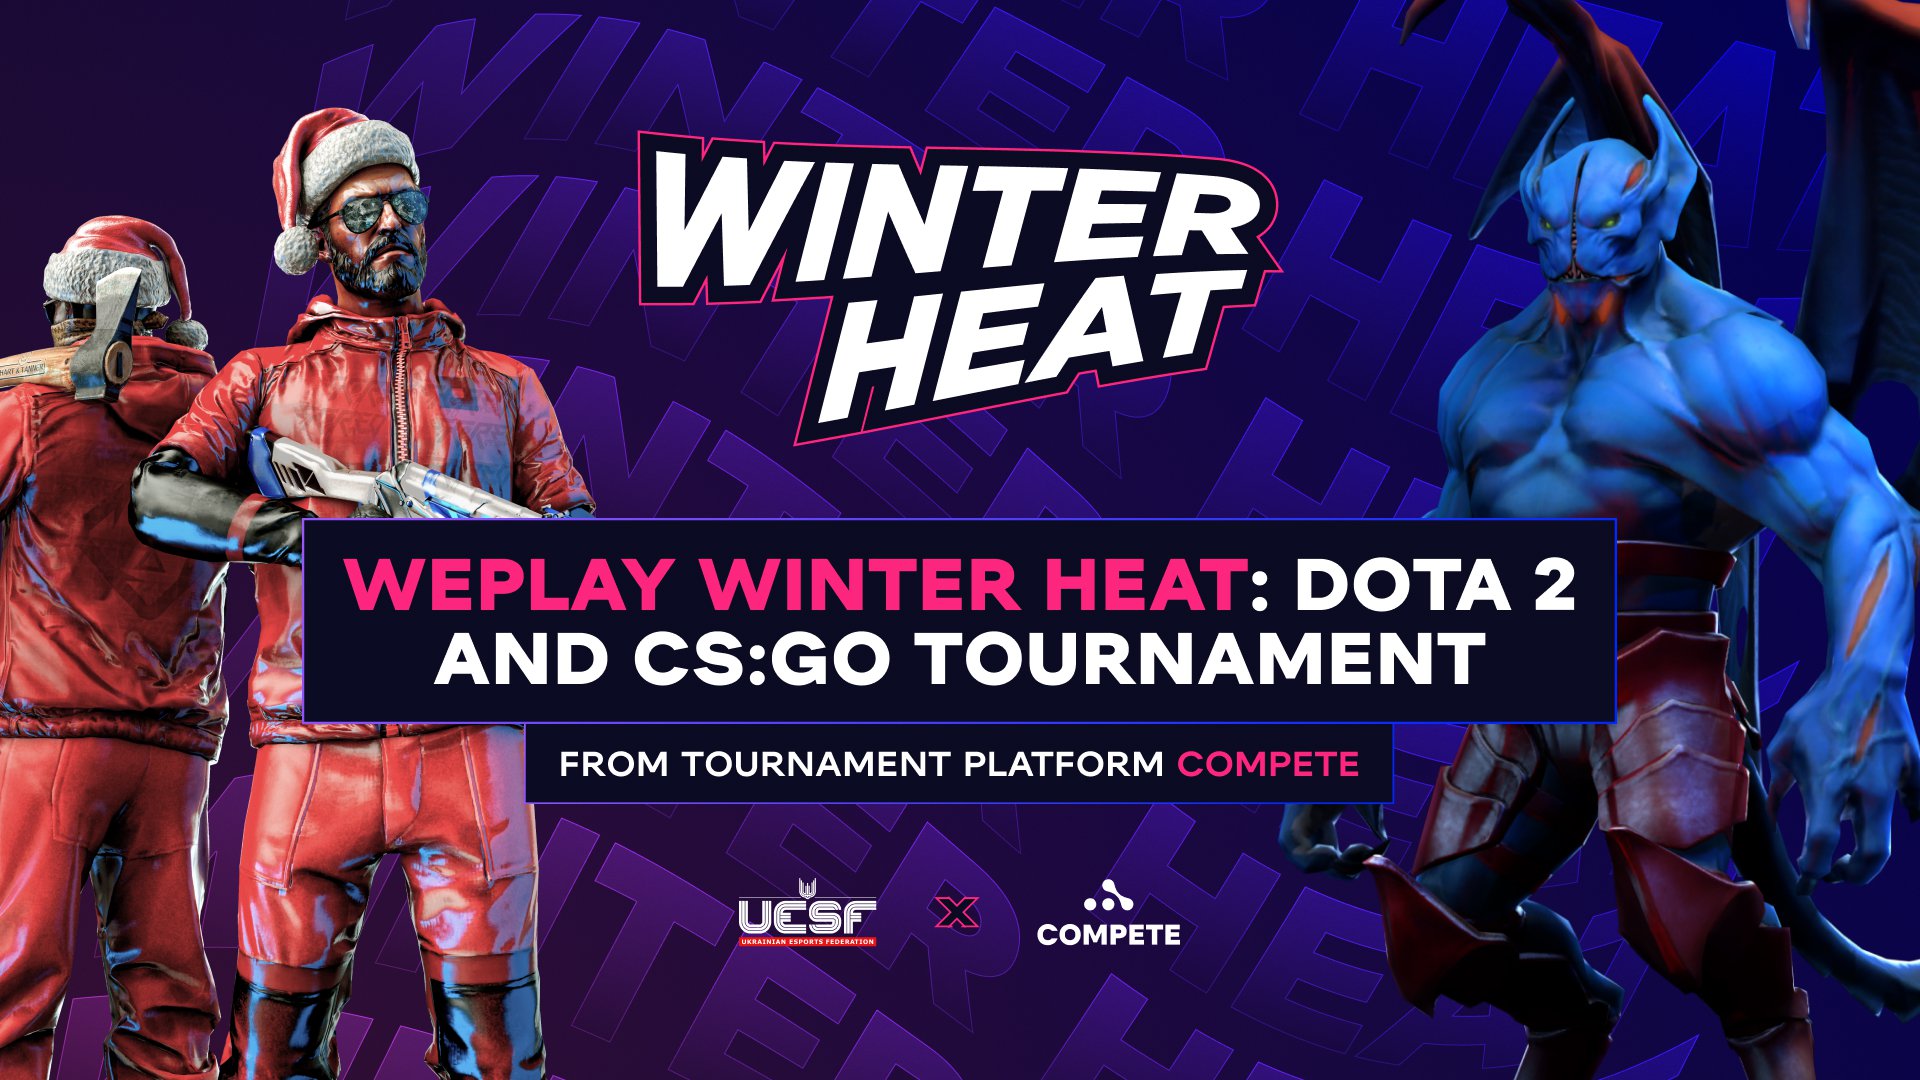 Tournament platform Compete hosted WePlay Winter Heat tournament supported by UESF